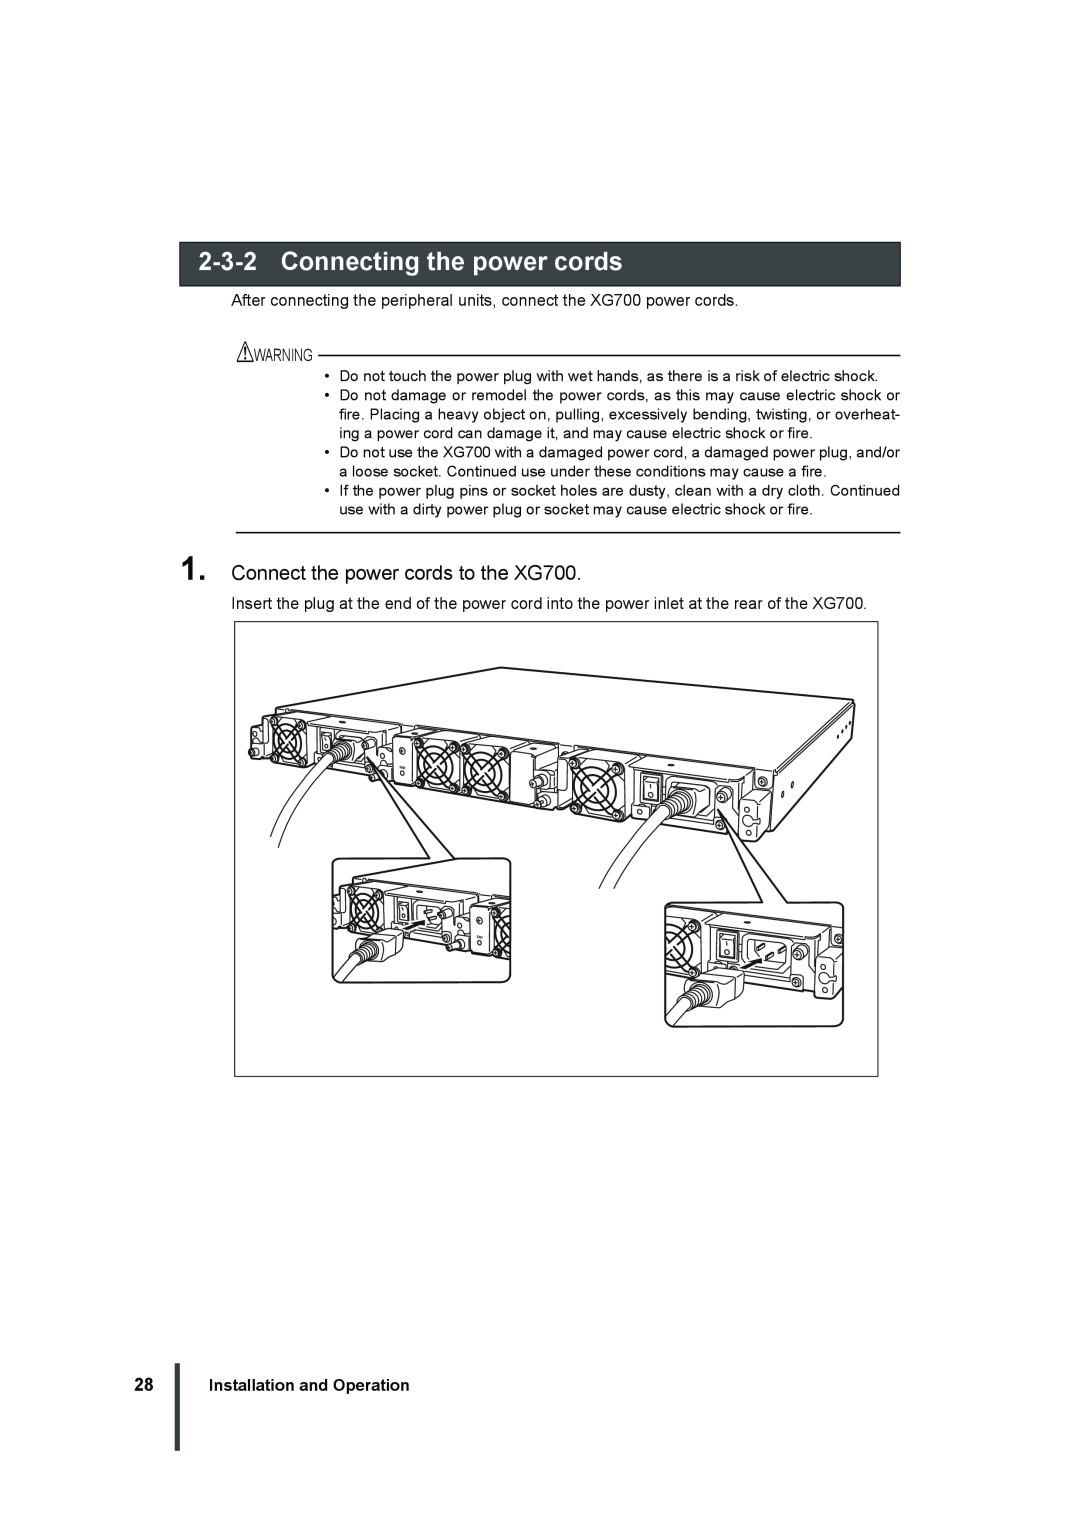 Fujitsu manual Connecting the power cords, Connect the power cords to the XG700, Installation and Operation 